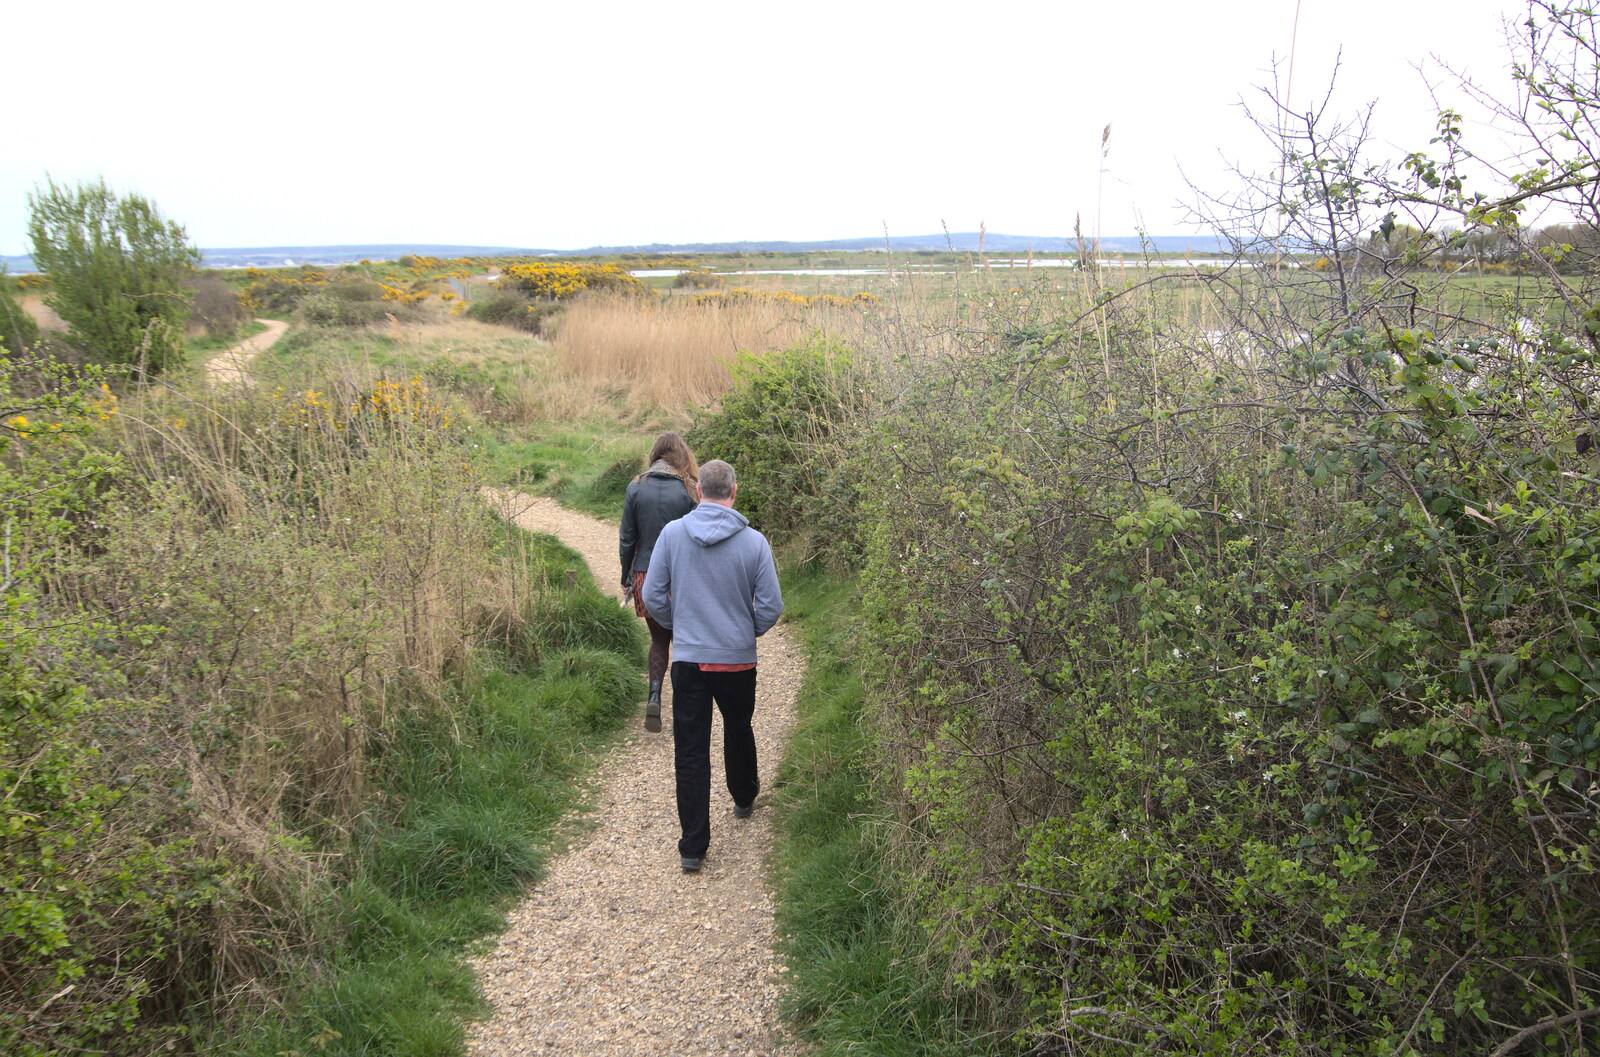 Bernice's Birthday and Walks Around New Milton and Lymington, Hampshire - 10th April 2022: We walk along the path to the river